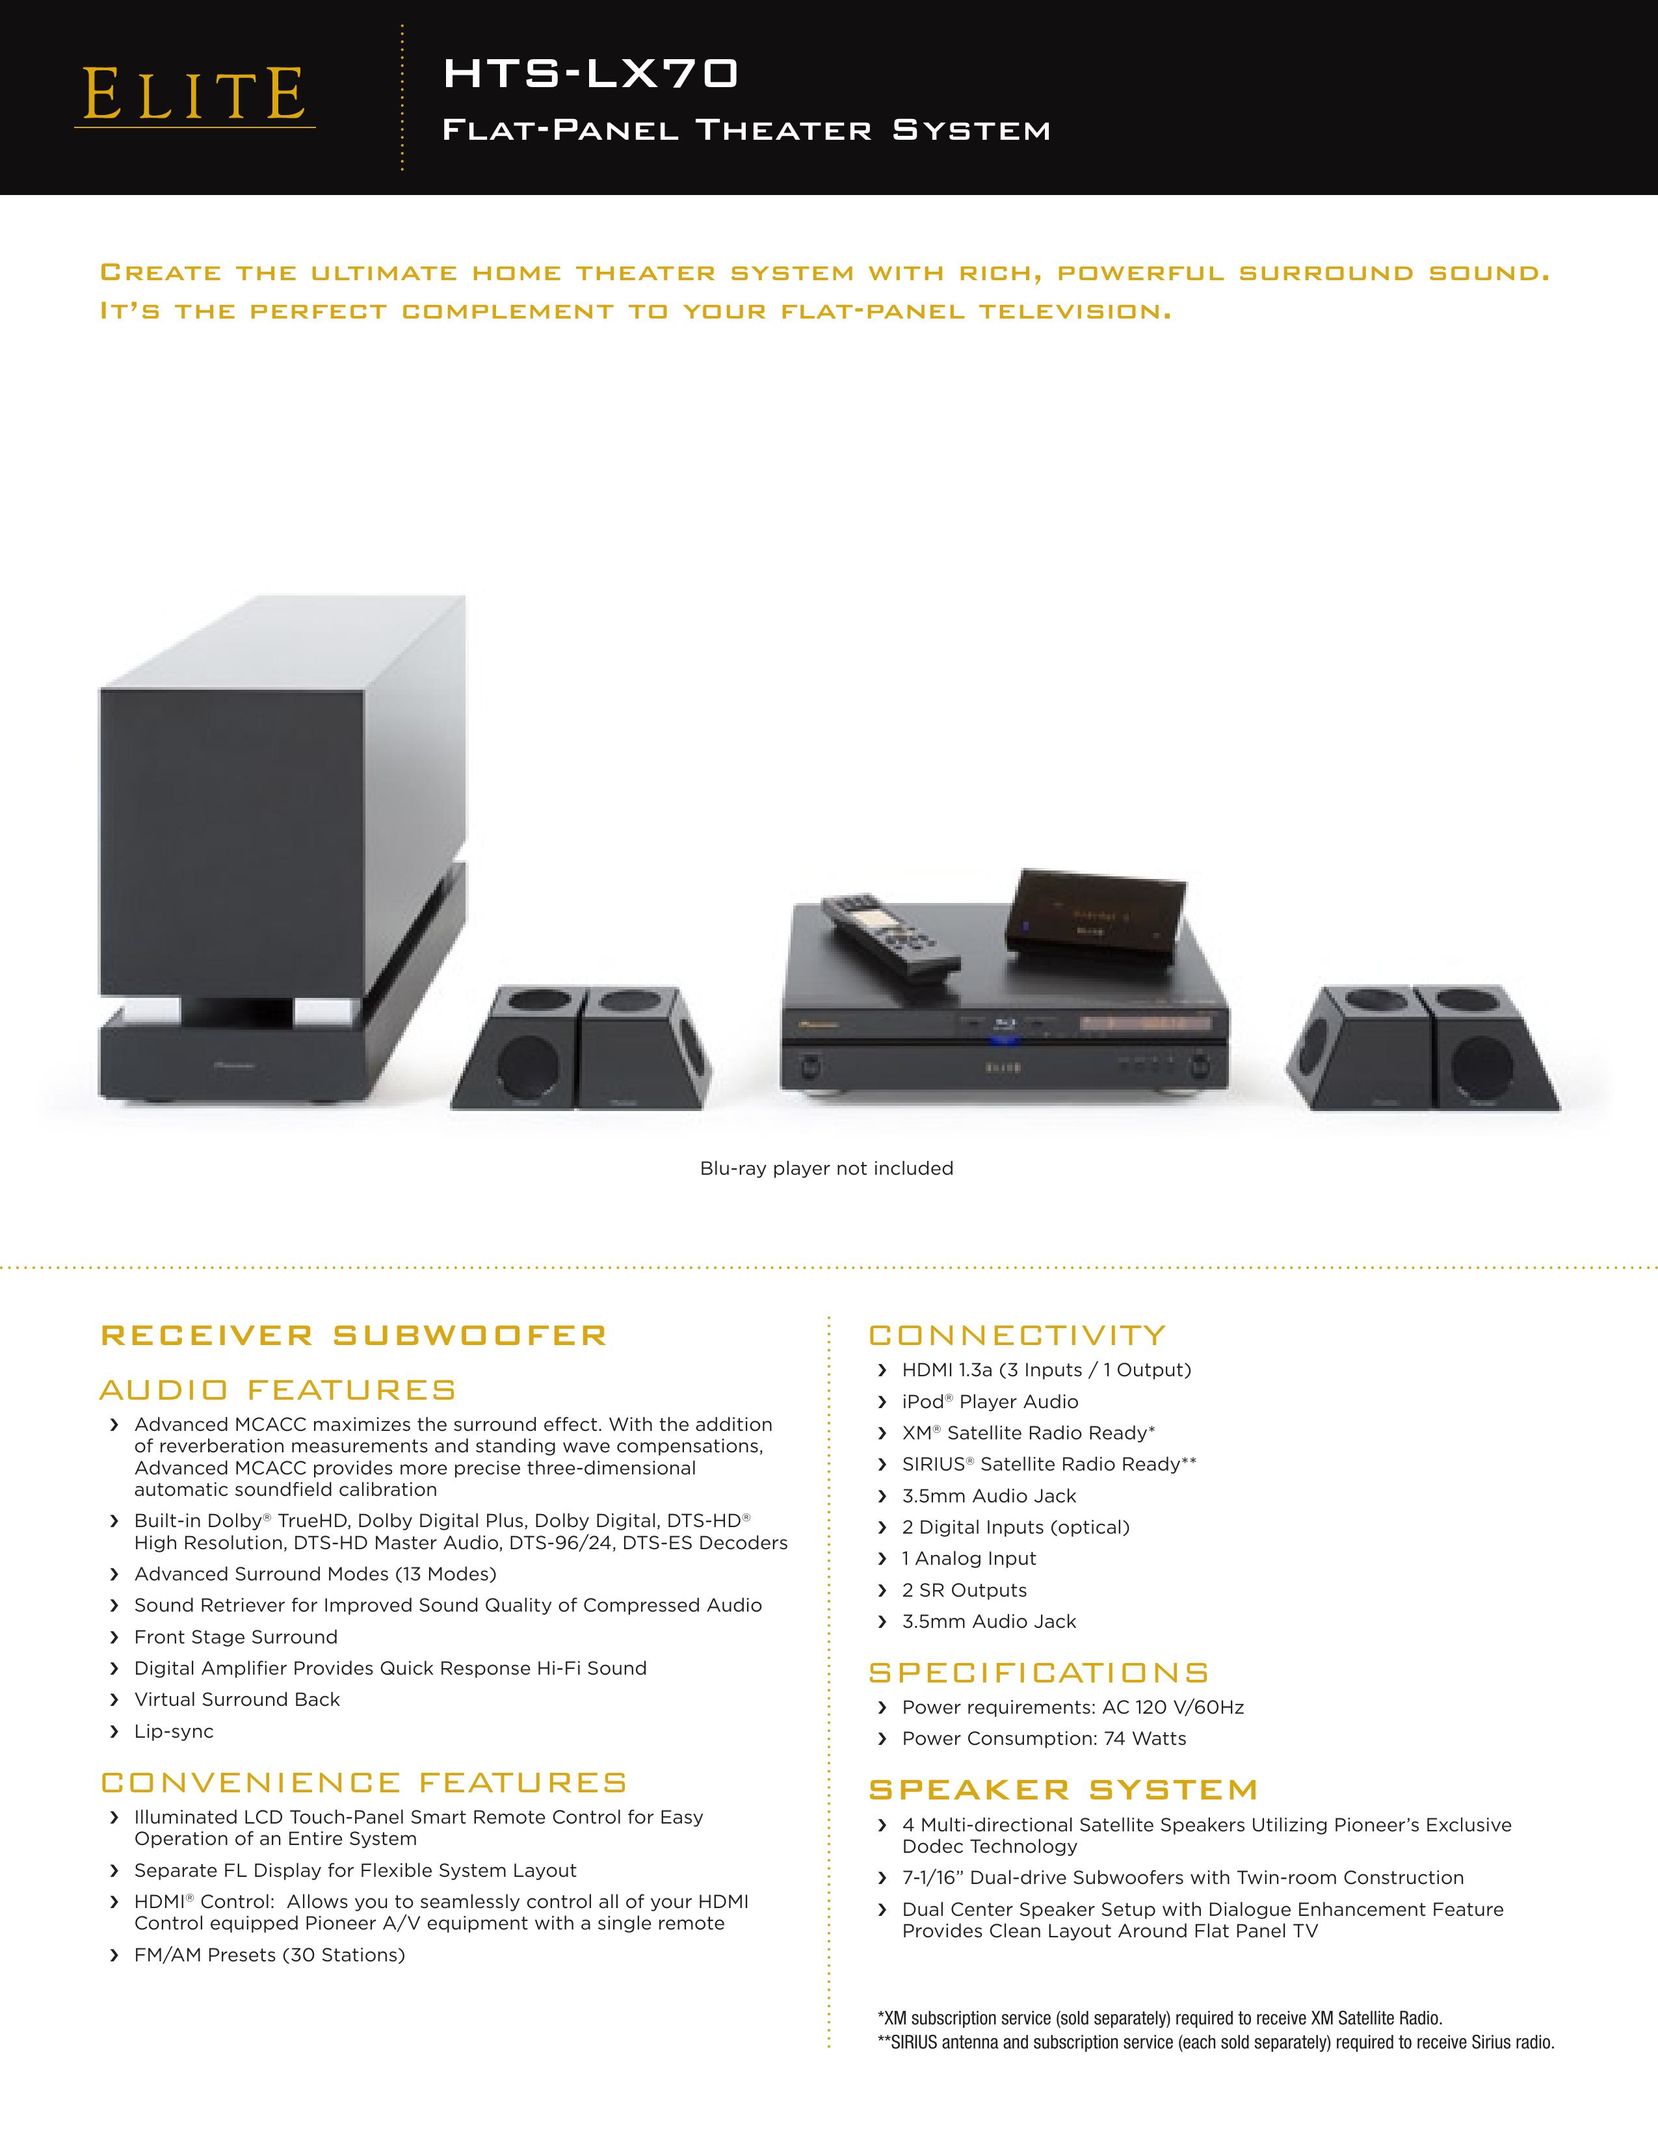 Elite HTS-LX70 Home Theater System User Manual